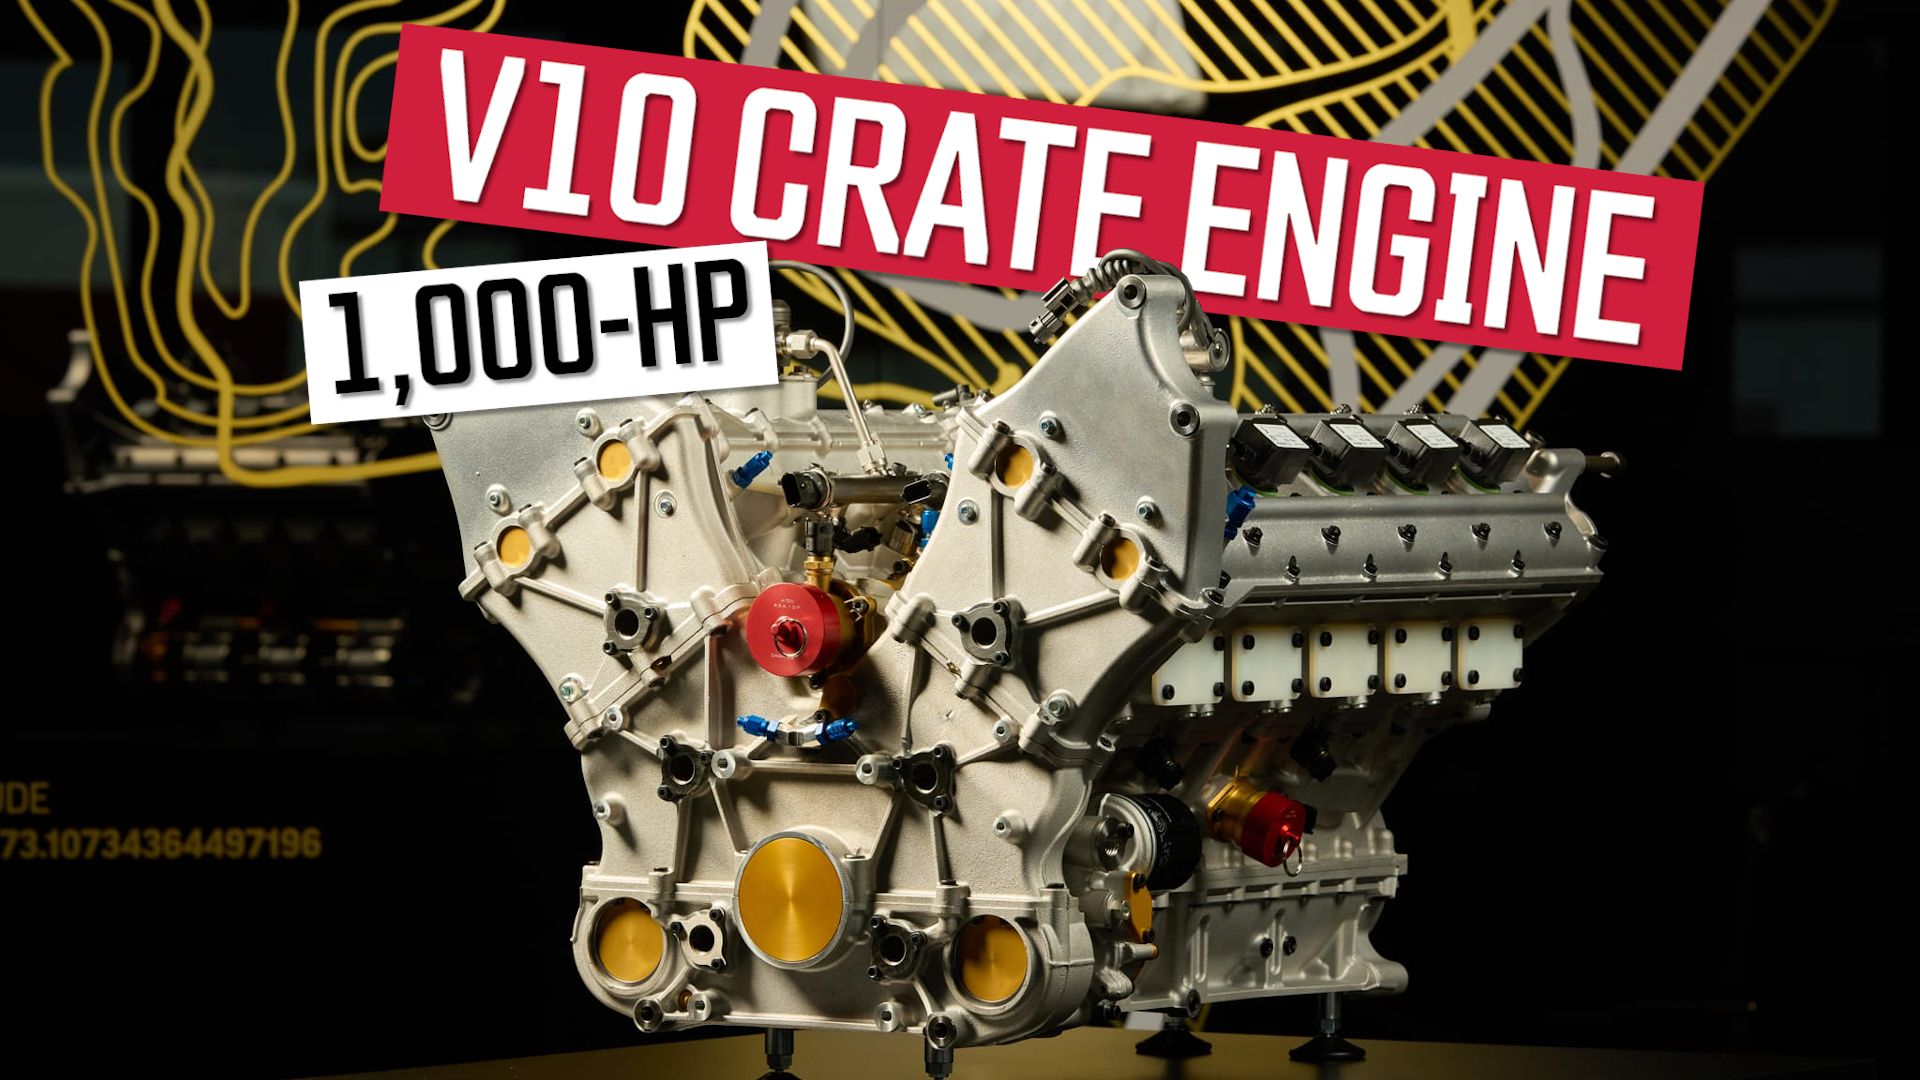 This Twin-Turbo 1,000-HP V10 Crate Engine Is The Perfect Way To Get Your V10 Fix